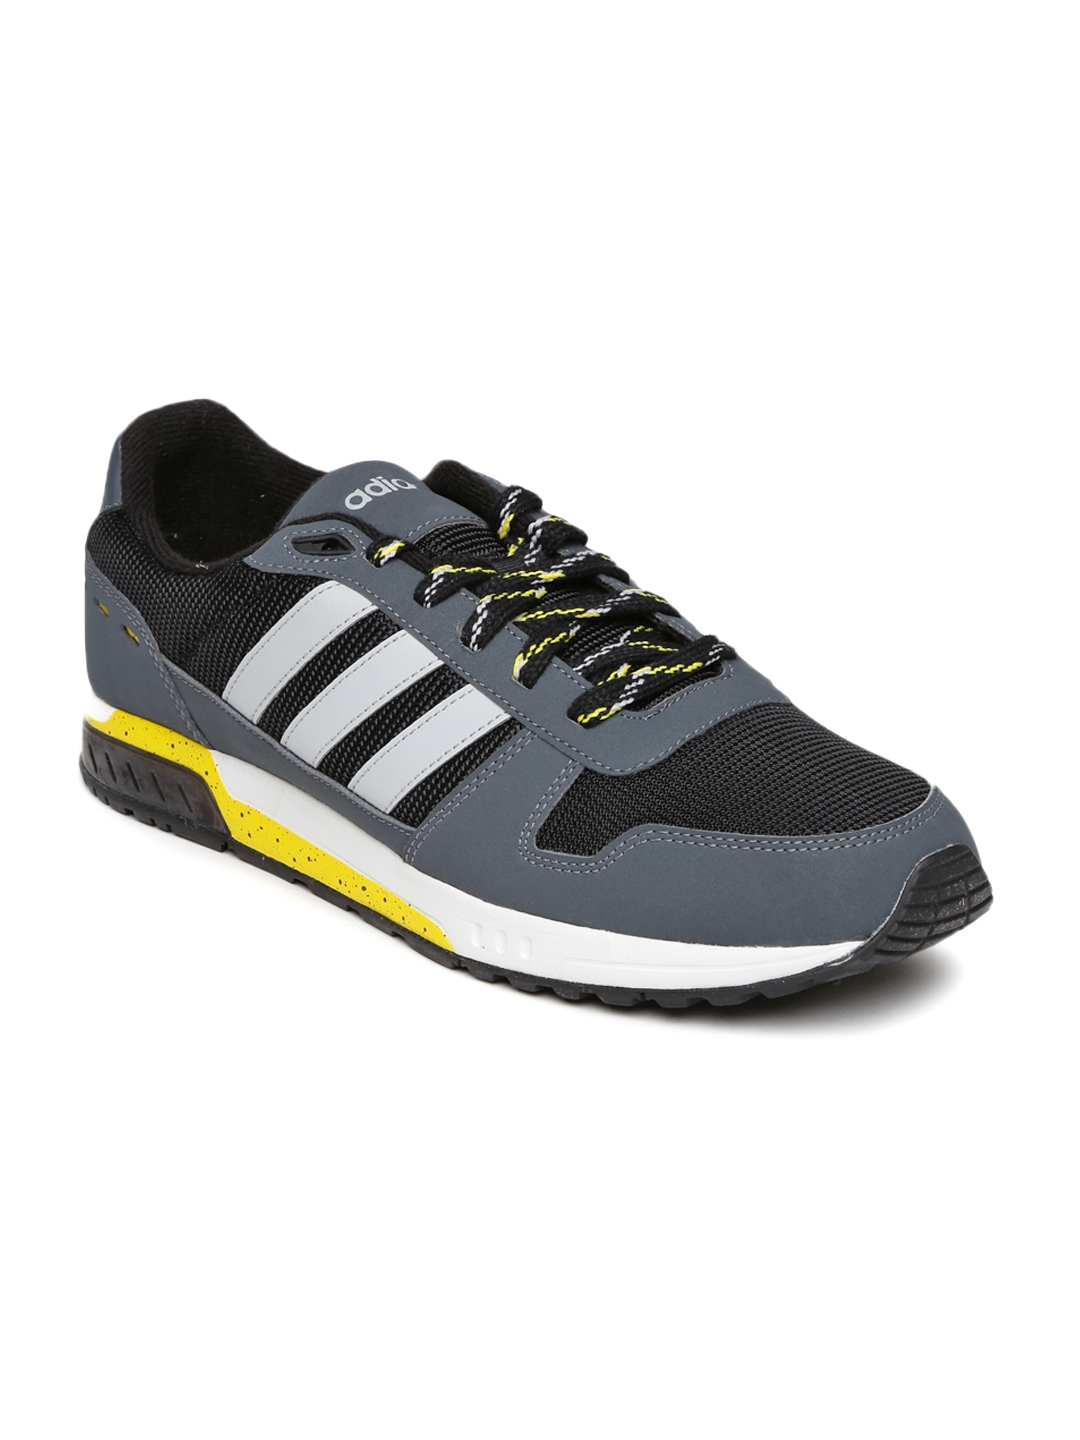 Buy ADIDAS NEO Grey & Black City Runner TR Sneakers Casual Shoes for Men 1026457 | Myntra